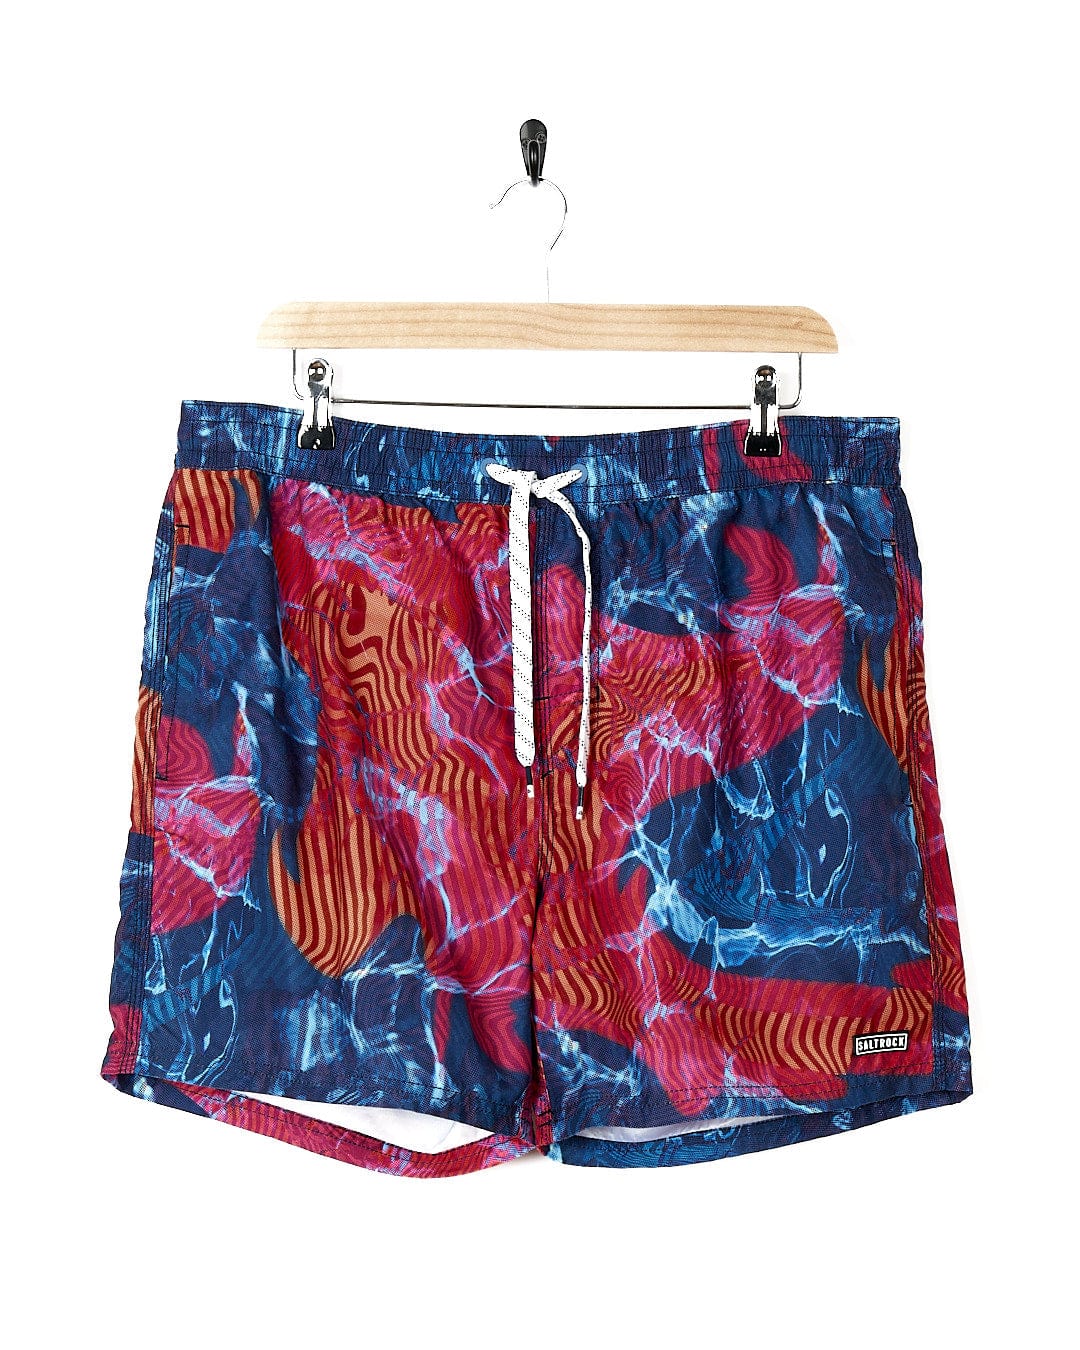 A Saltrock men's swim short with a Poolside - Mens All Over Print Swimshort - Teal.